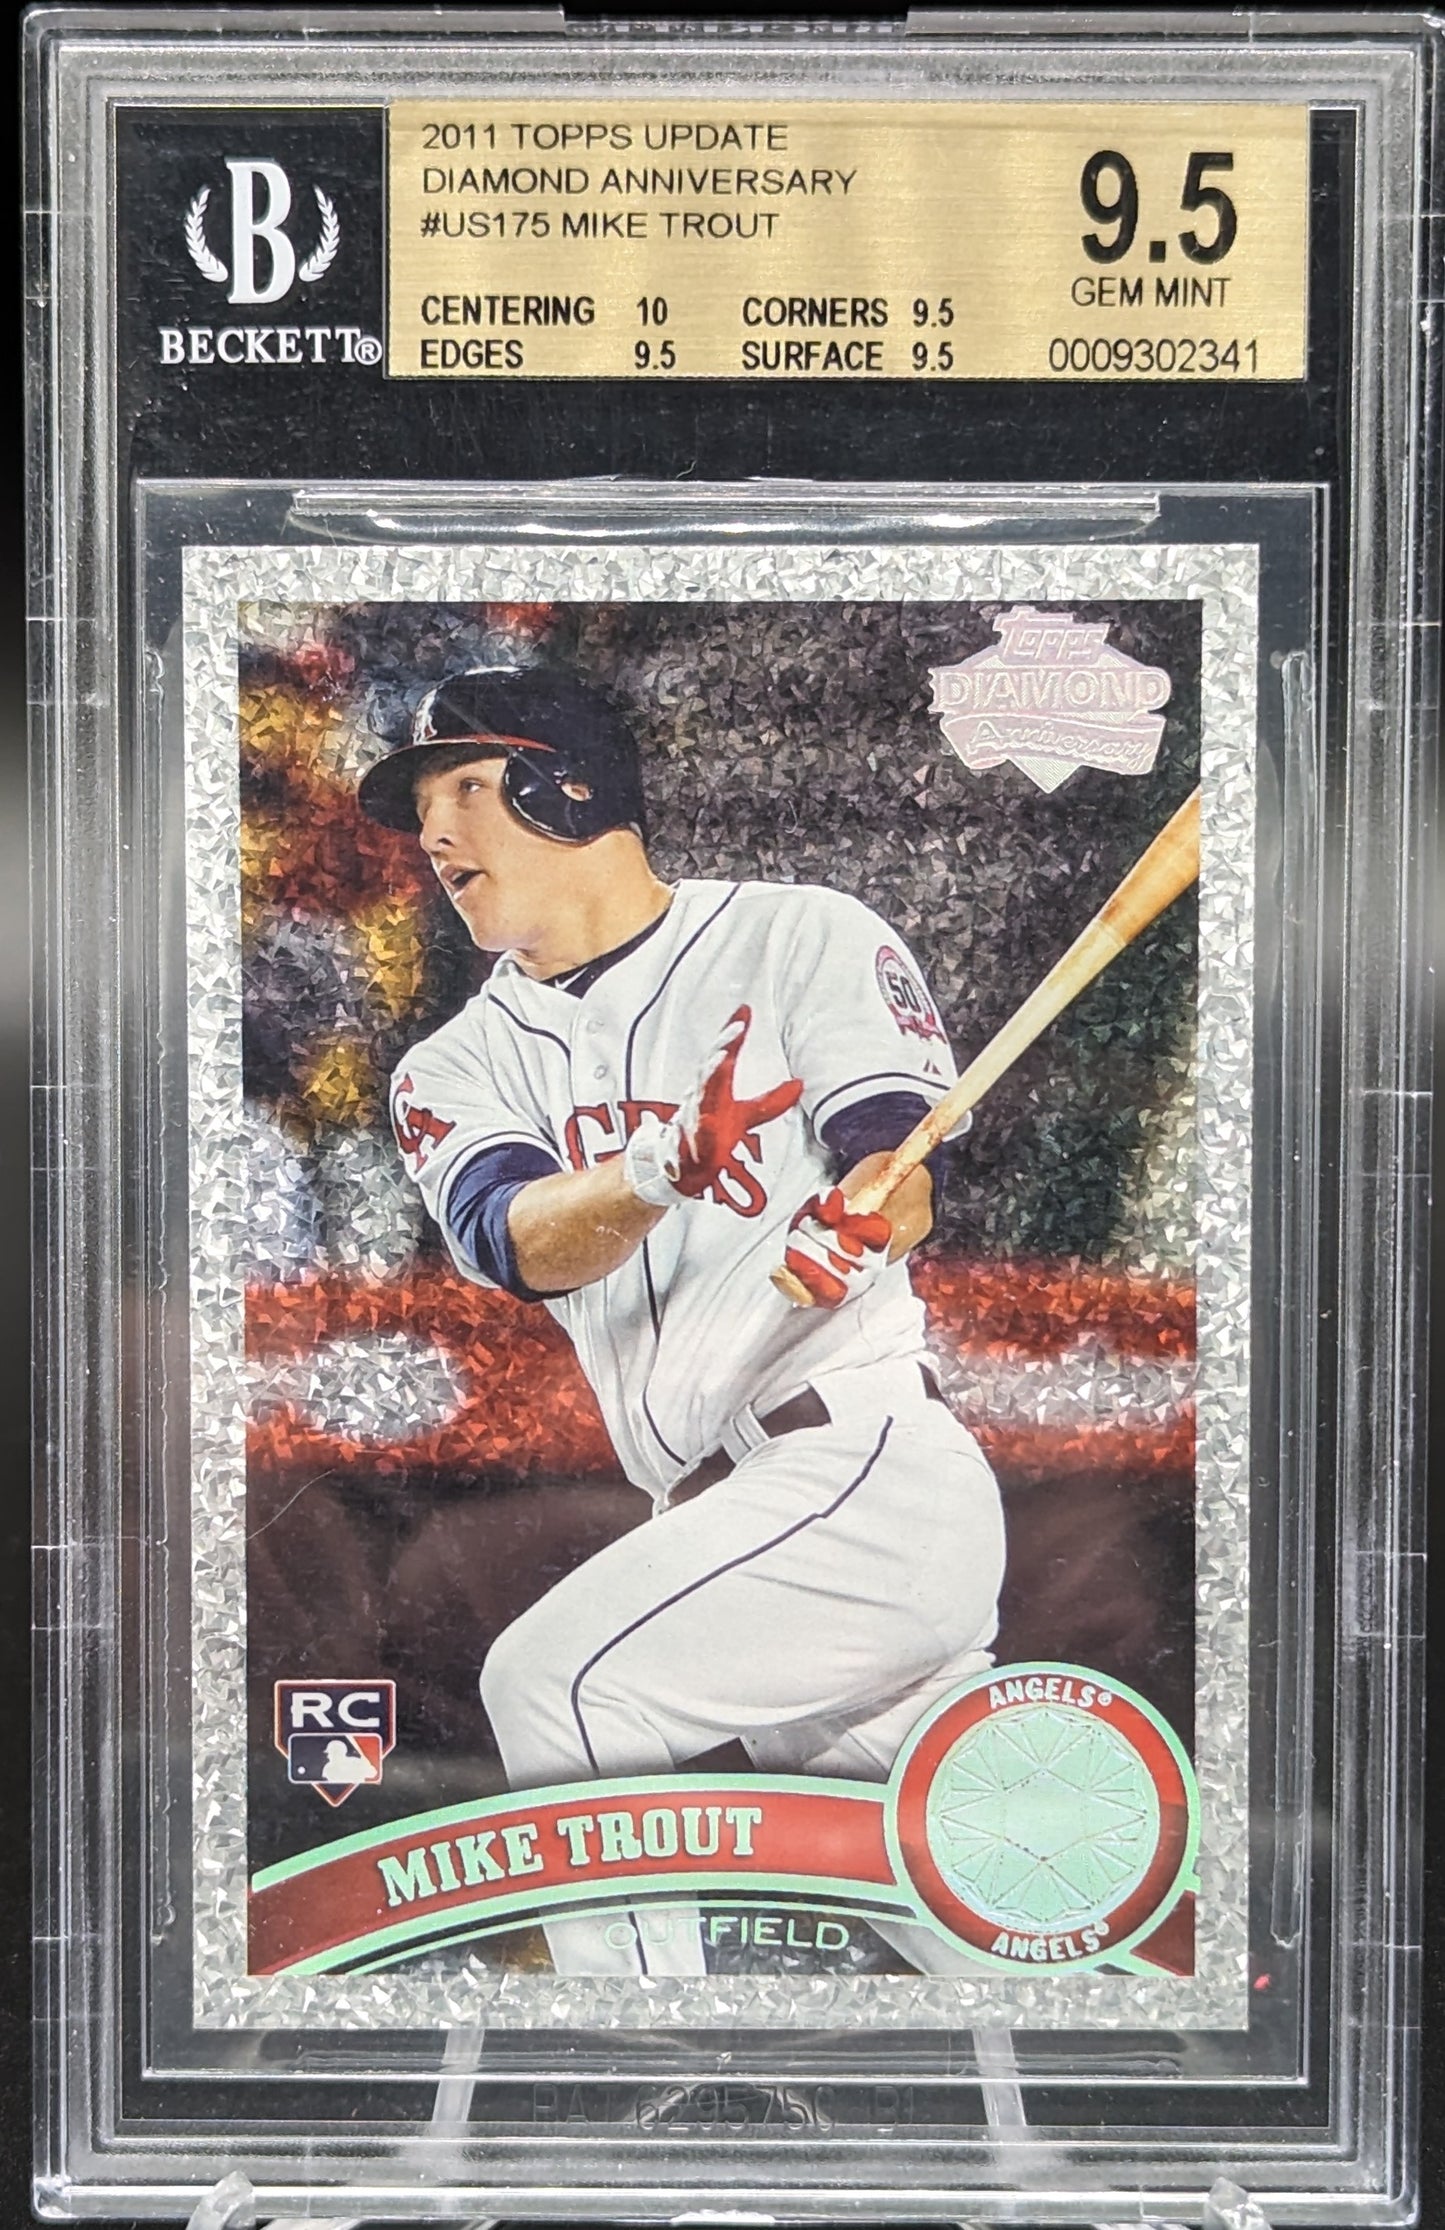 2011 Topps Update Diamond Anniversary #US175 Mike Trout RC BGS 9.5